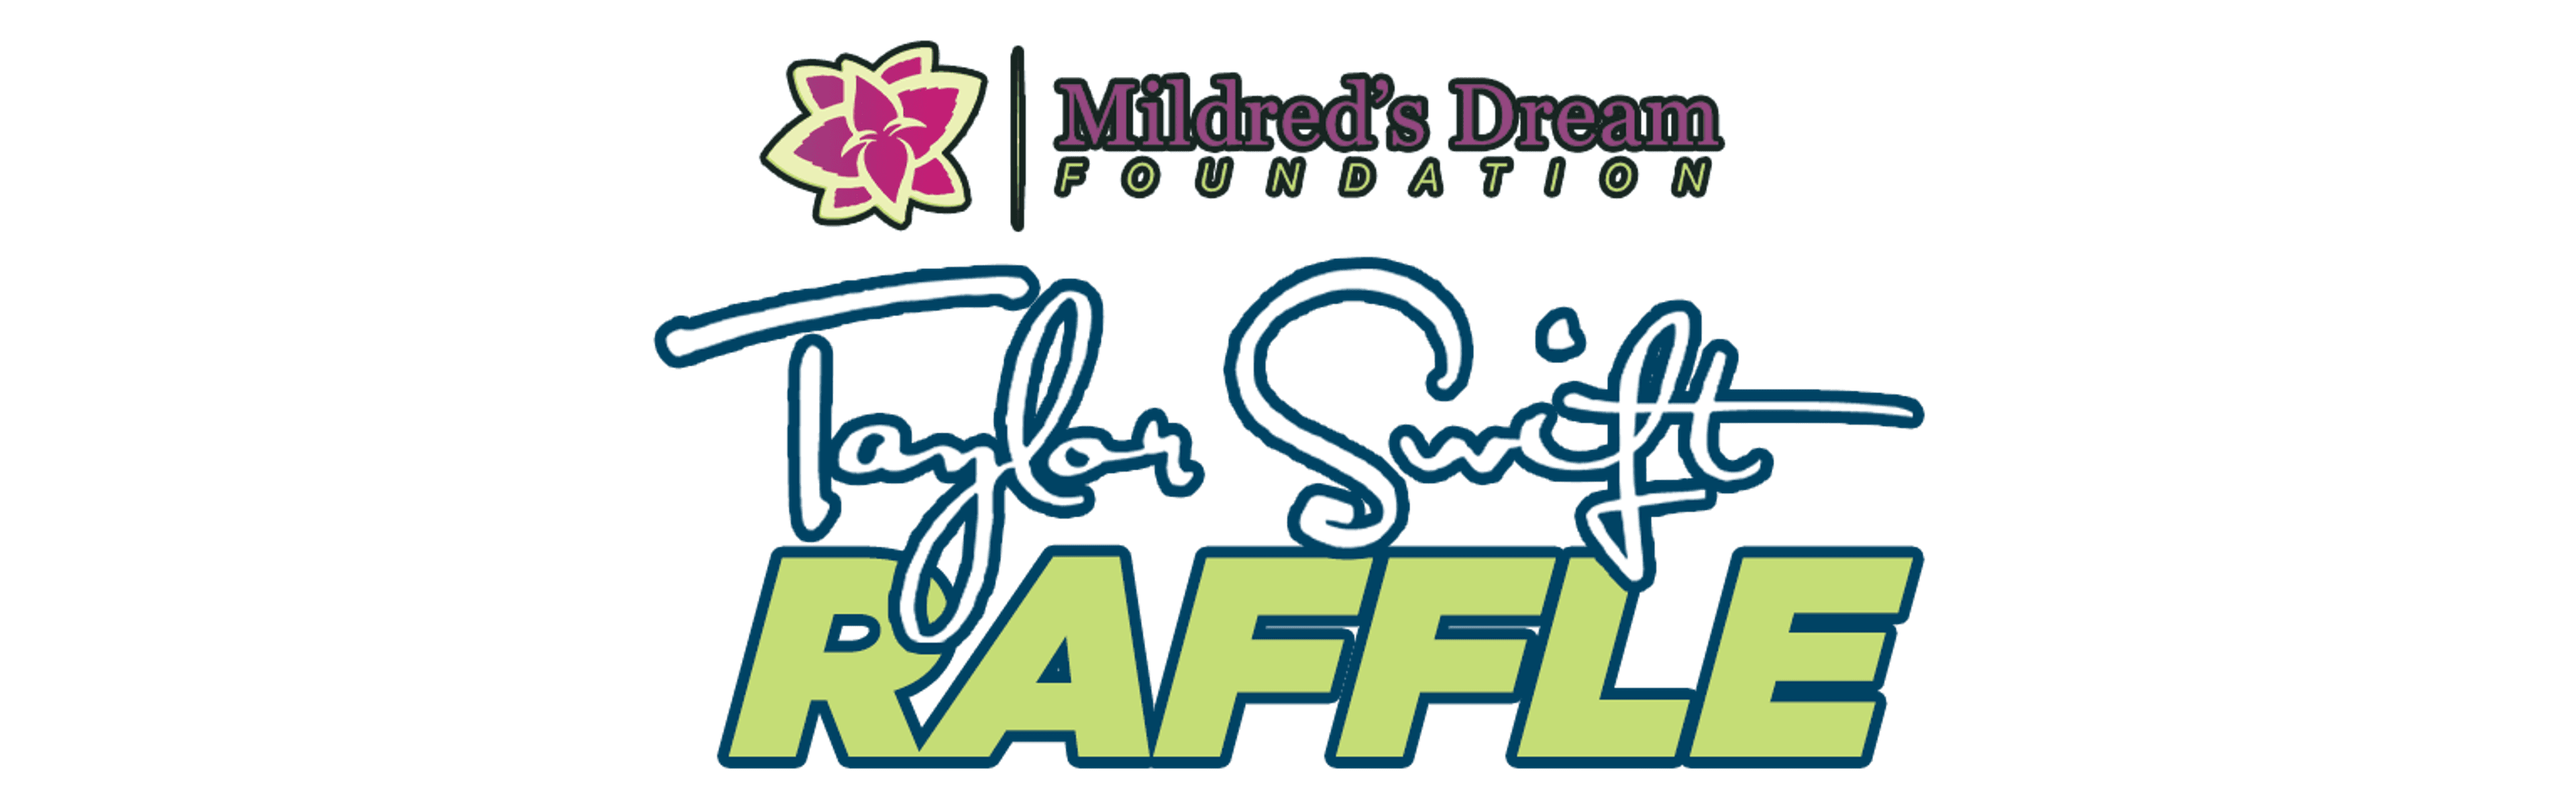 Taylor Swift Ticket Raffle presented by Mildred's Dream Foundation logo image